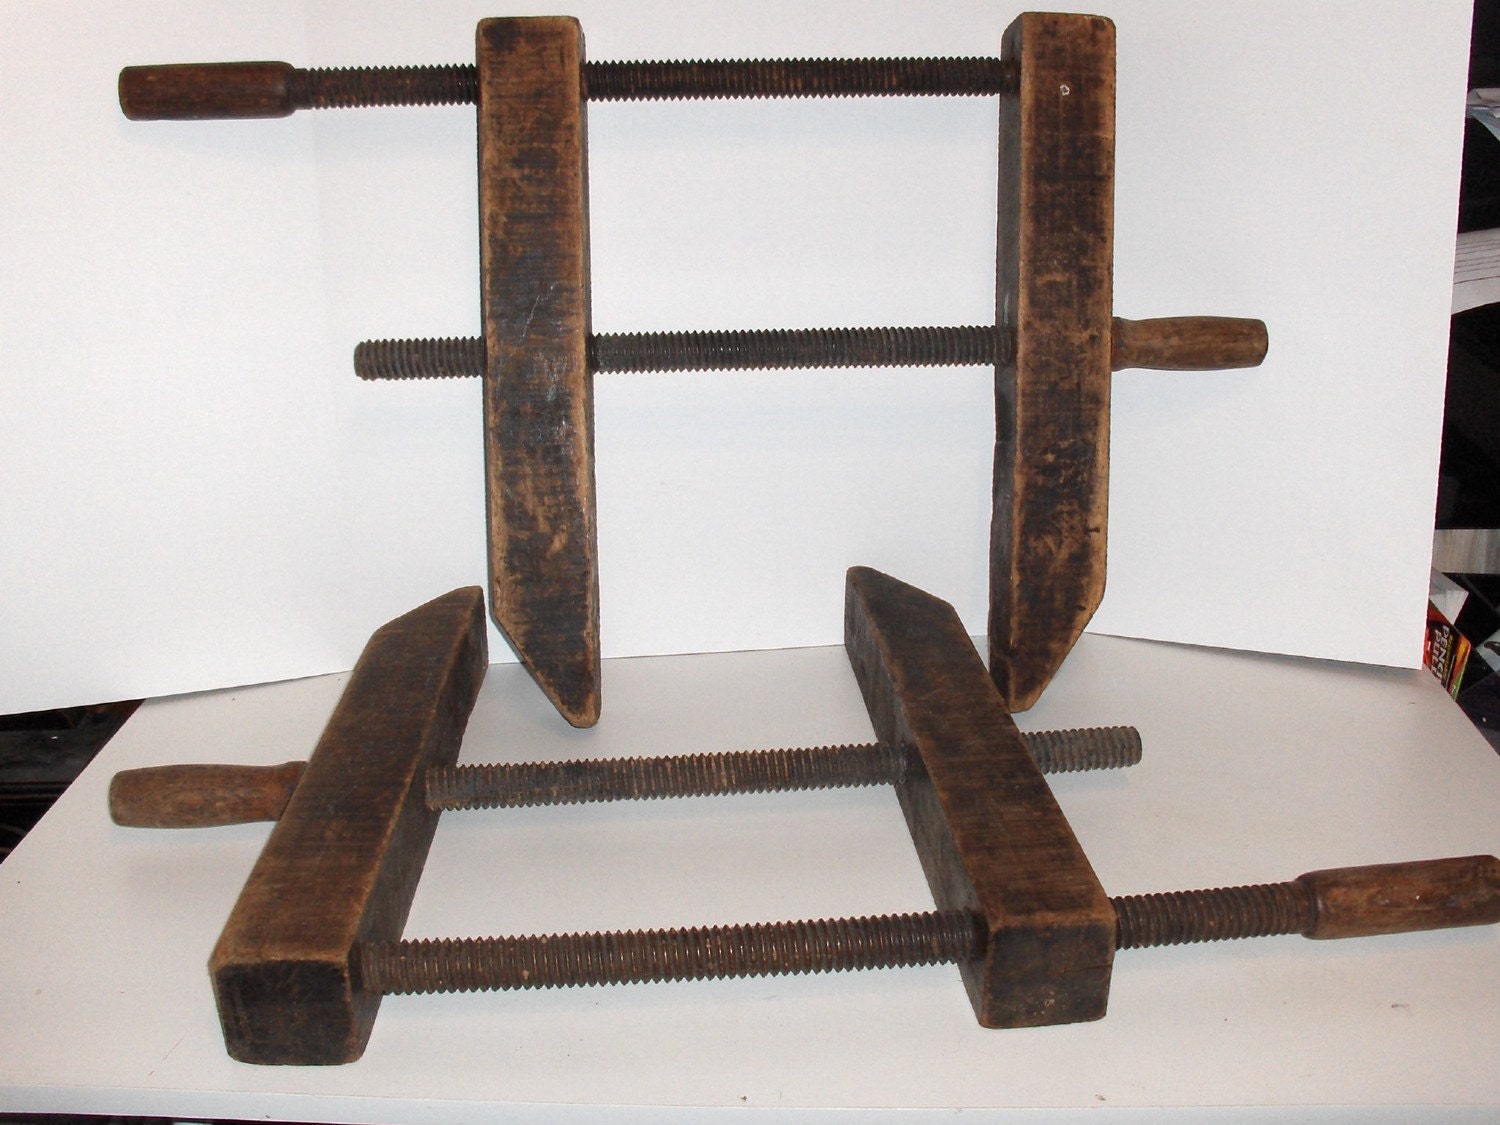 Antique Wooden Clamps Very Large No. 0